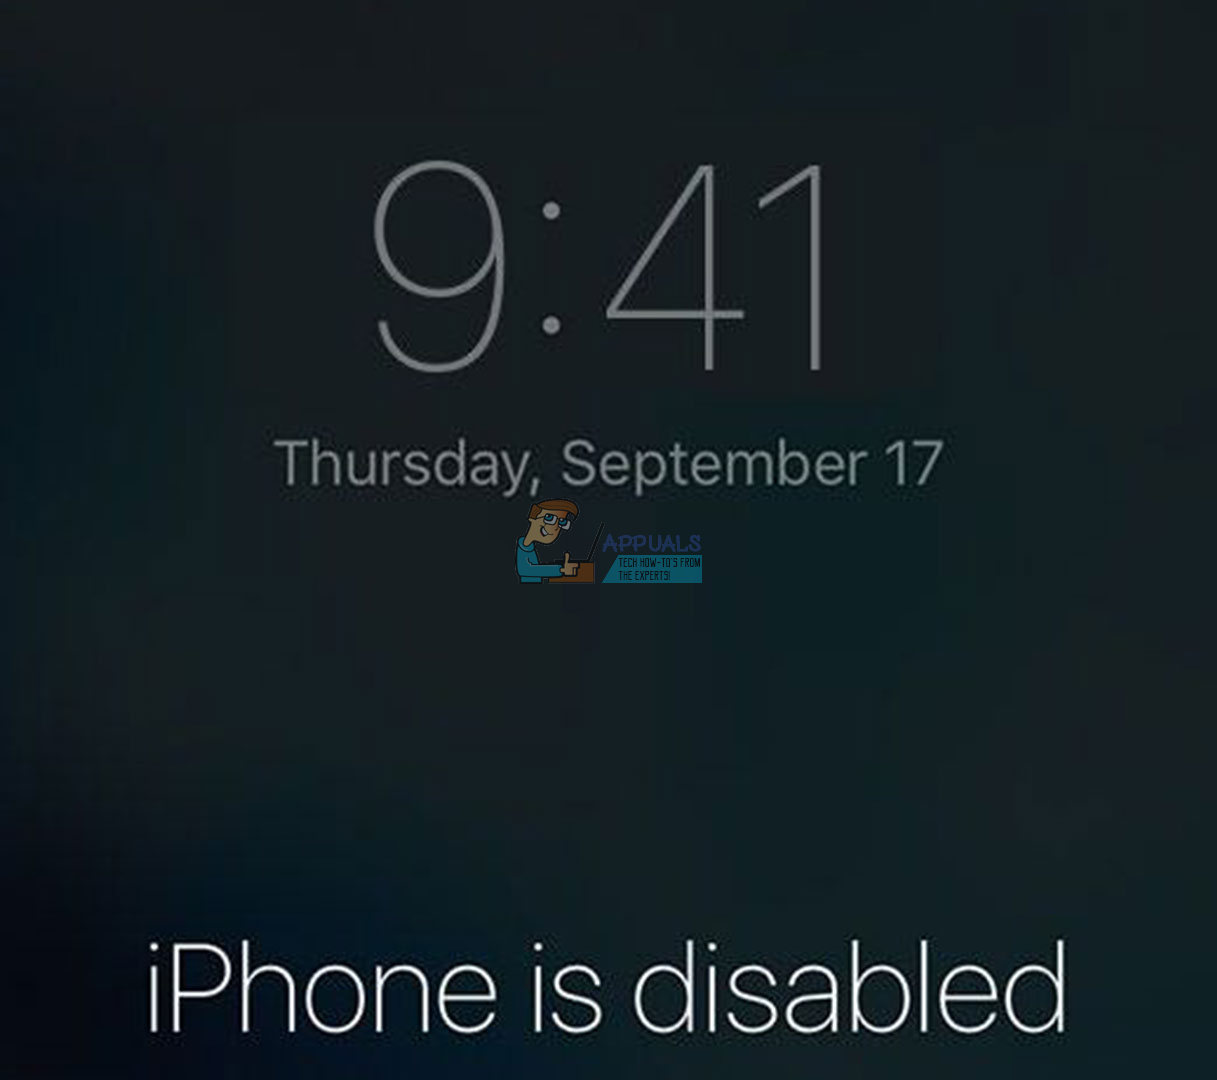 iPhone Disabled But You Know the Password How to Unlock the iPhone without  Losing Data